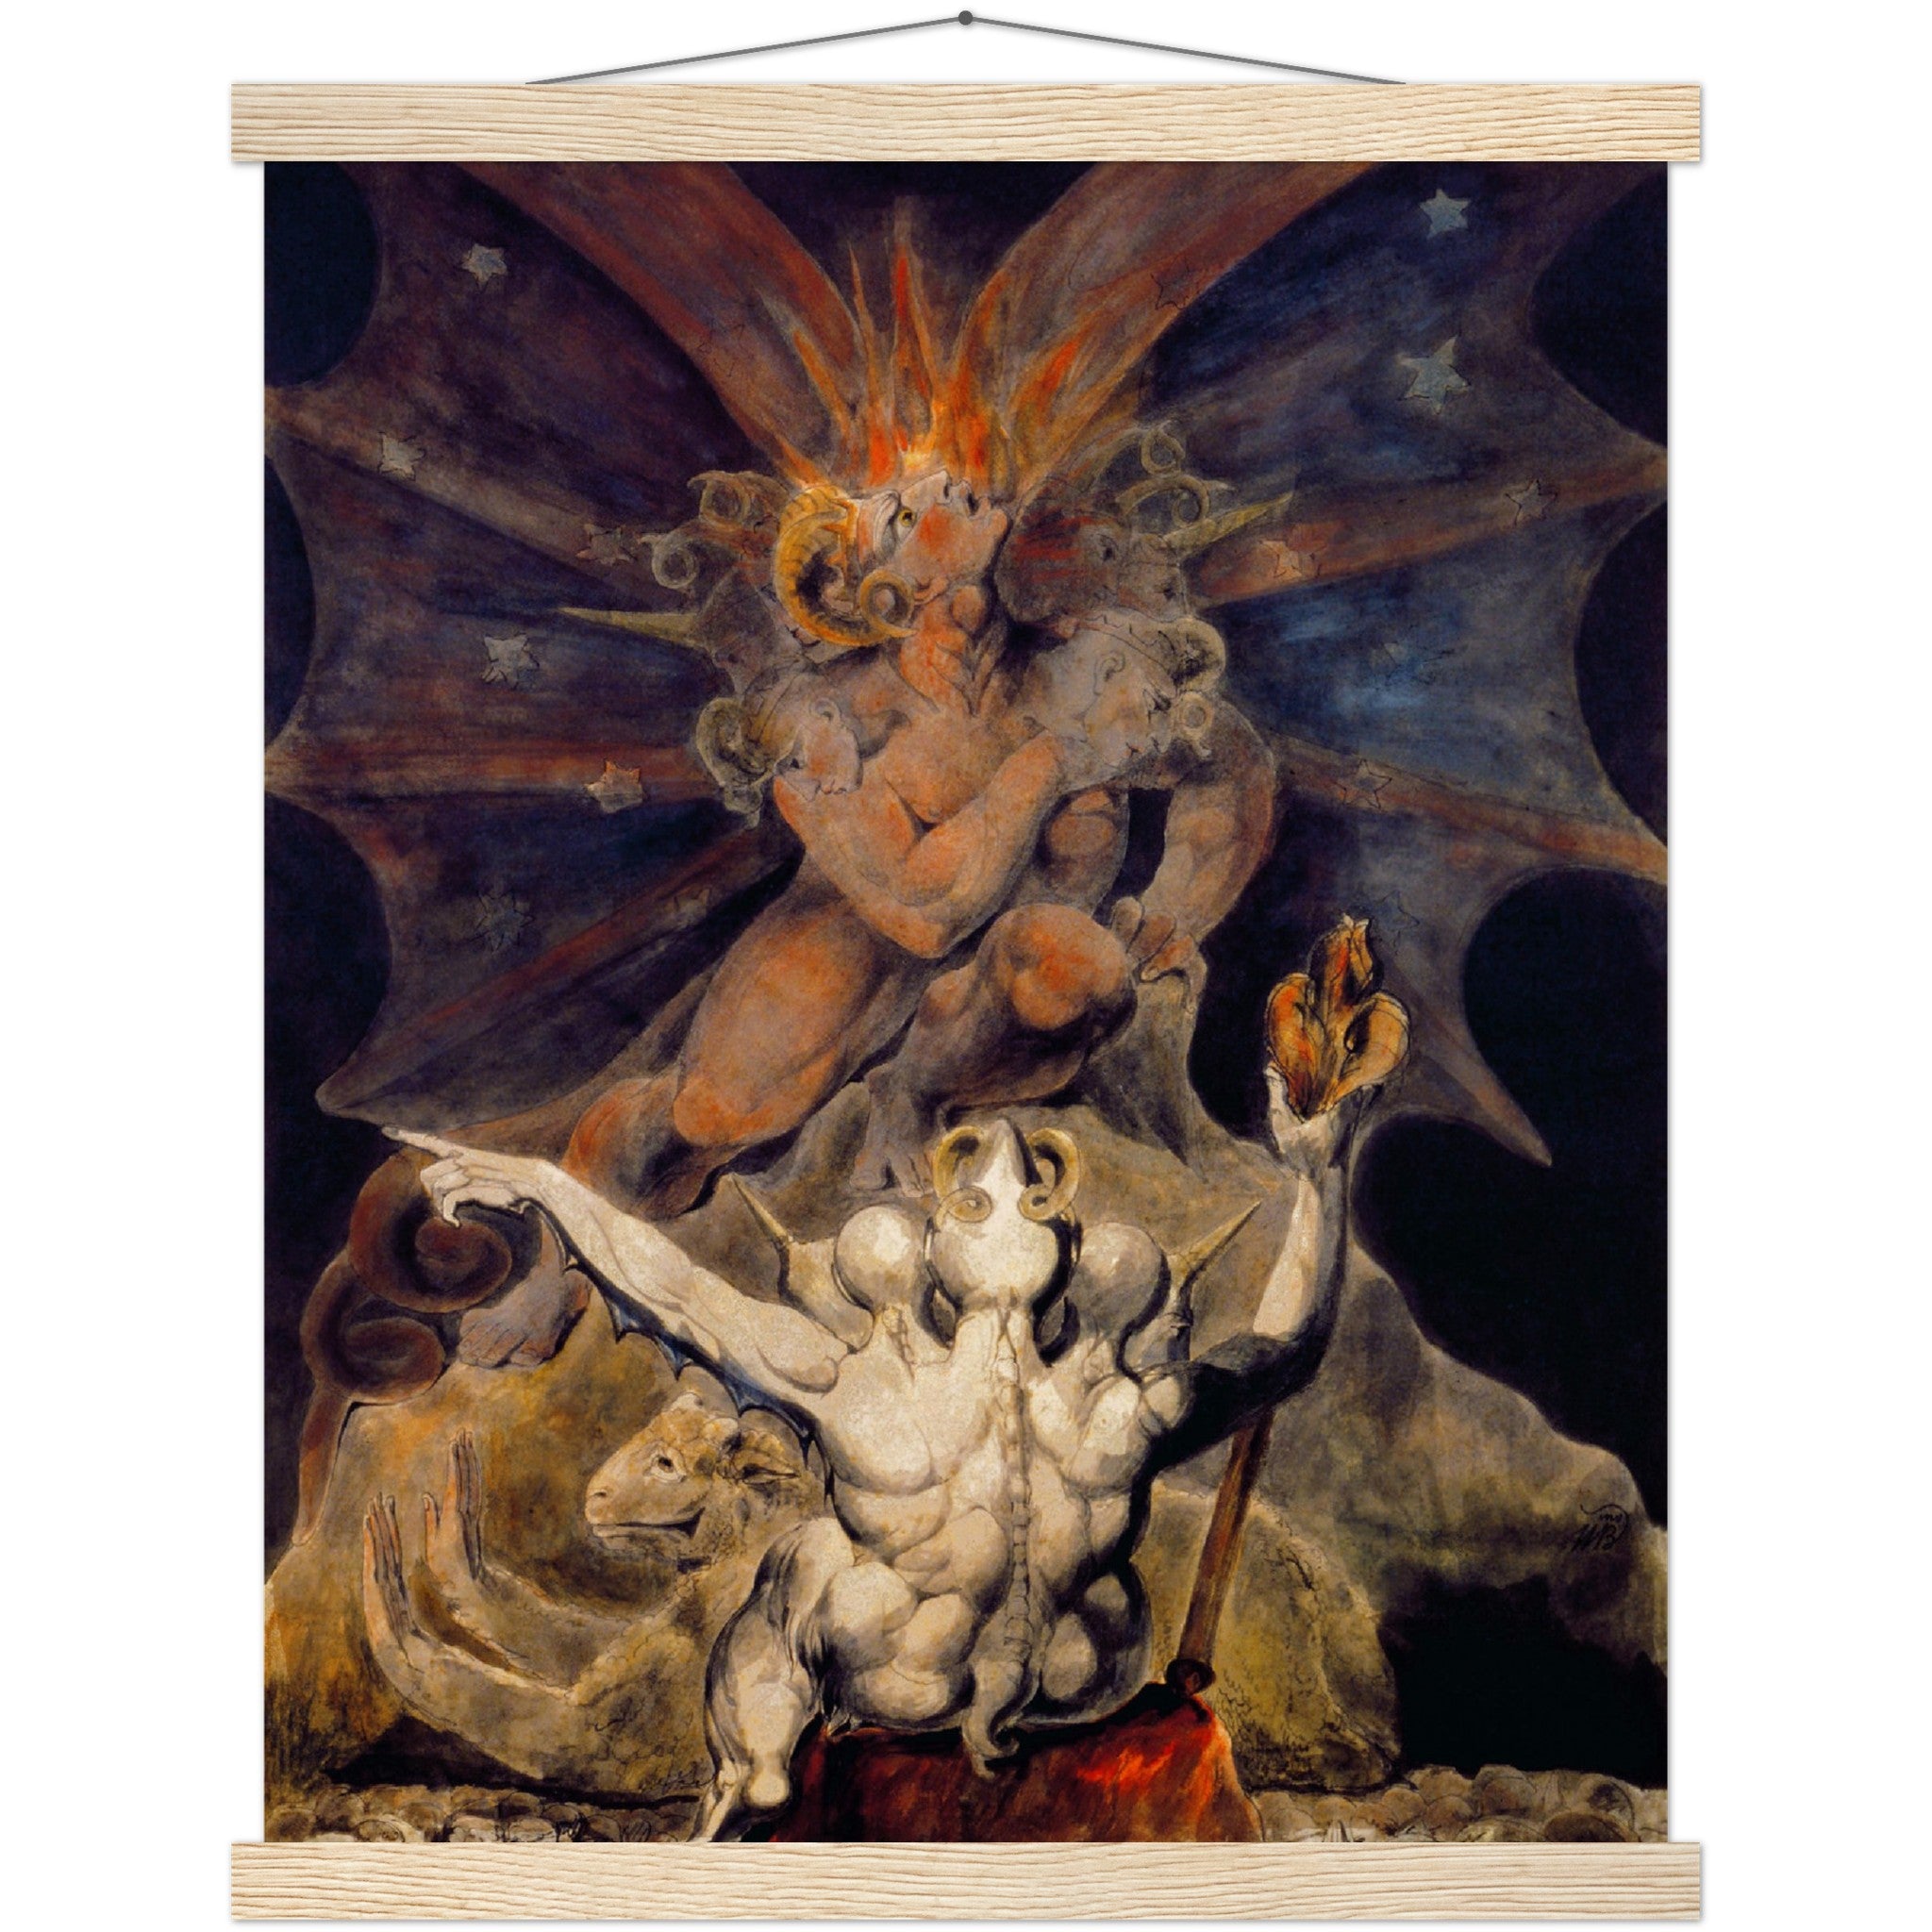 William Blake Poster, The Number Of The Beast Is 666, End Of Times Poster UK, EU USA Domestic Shipping